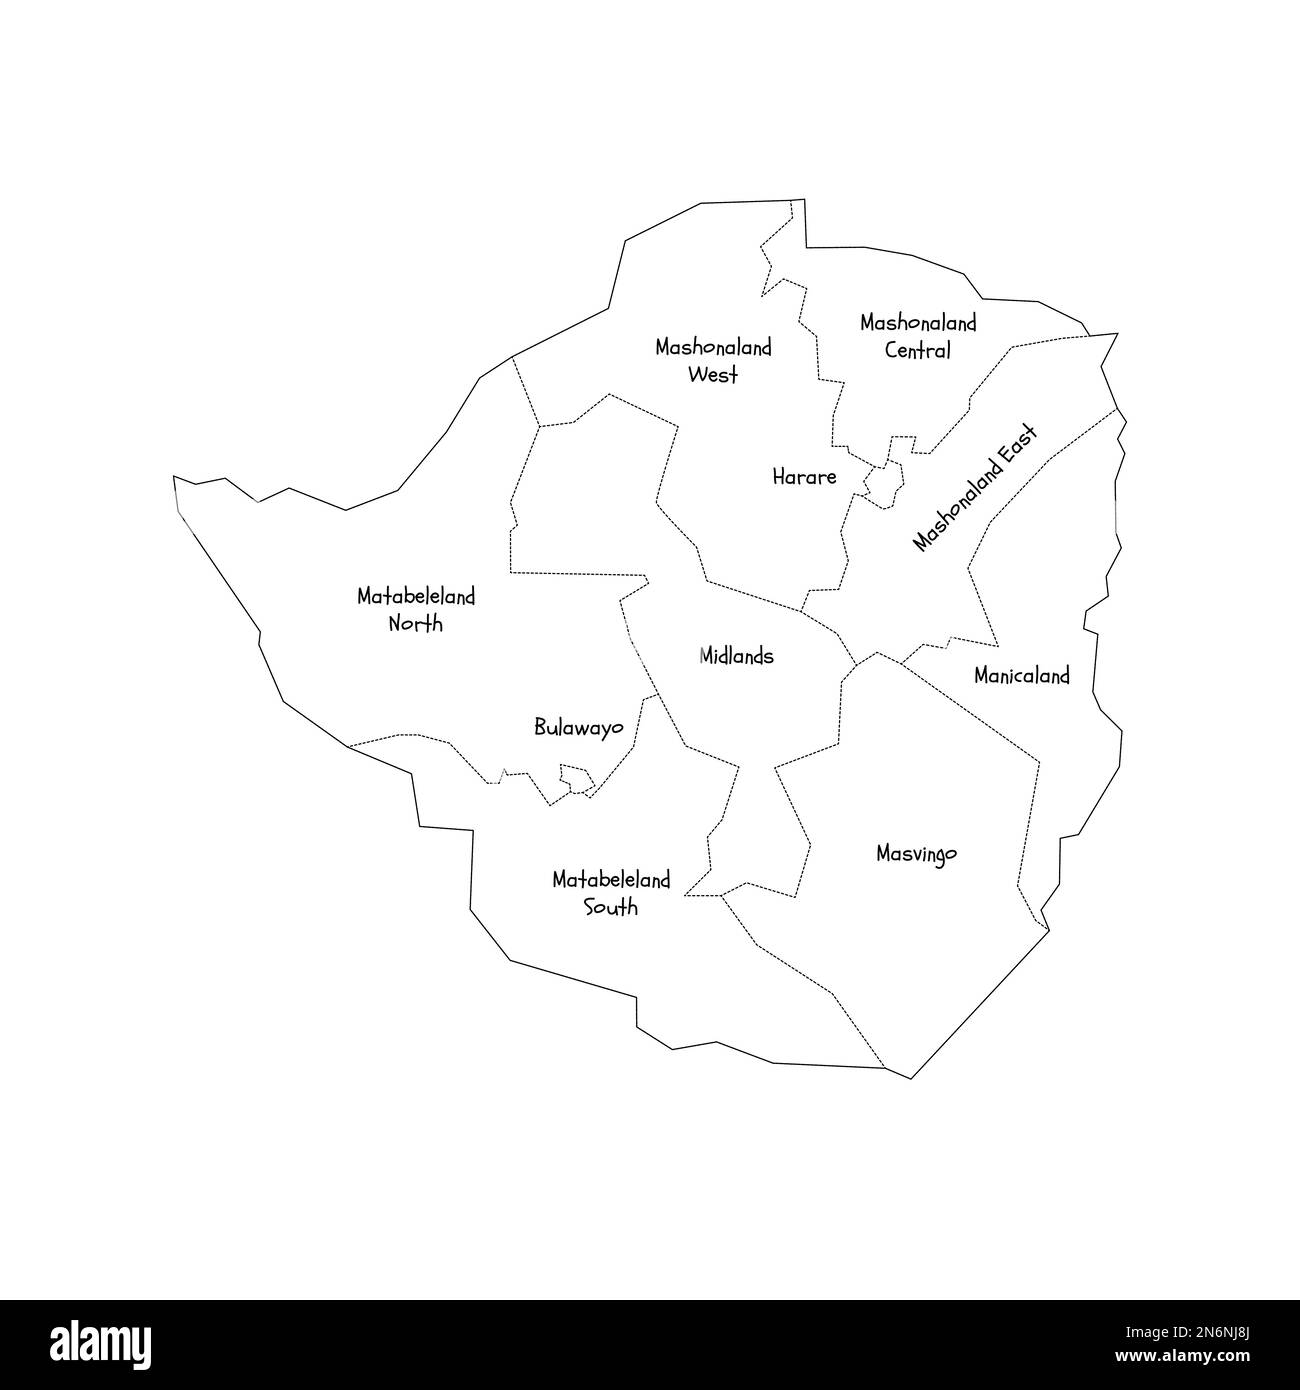 Zimbabwe political map of administrative divisions - provinces. Handdrawn doodle style map with black outline borders and name labels. Stock Vector